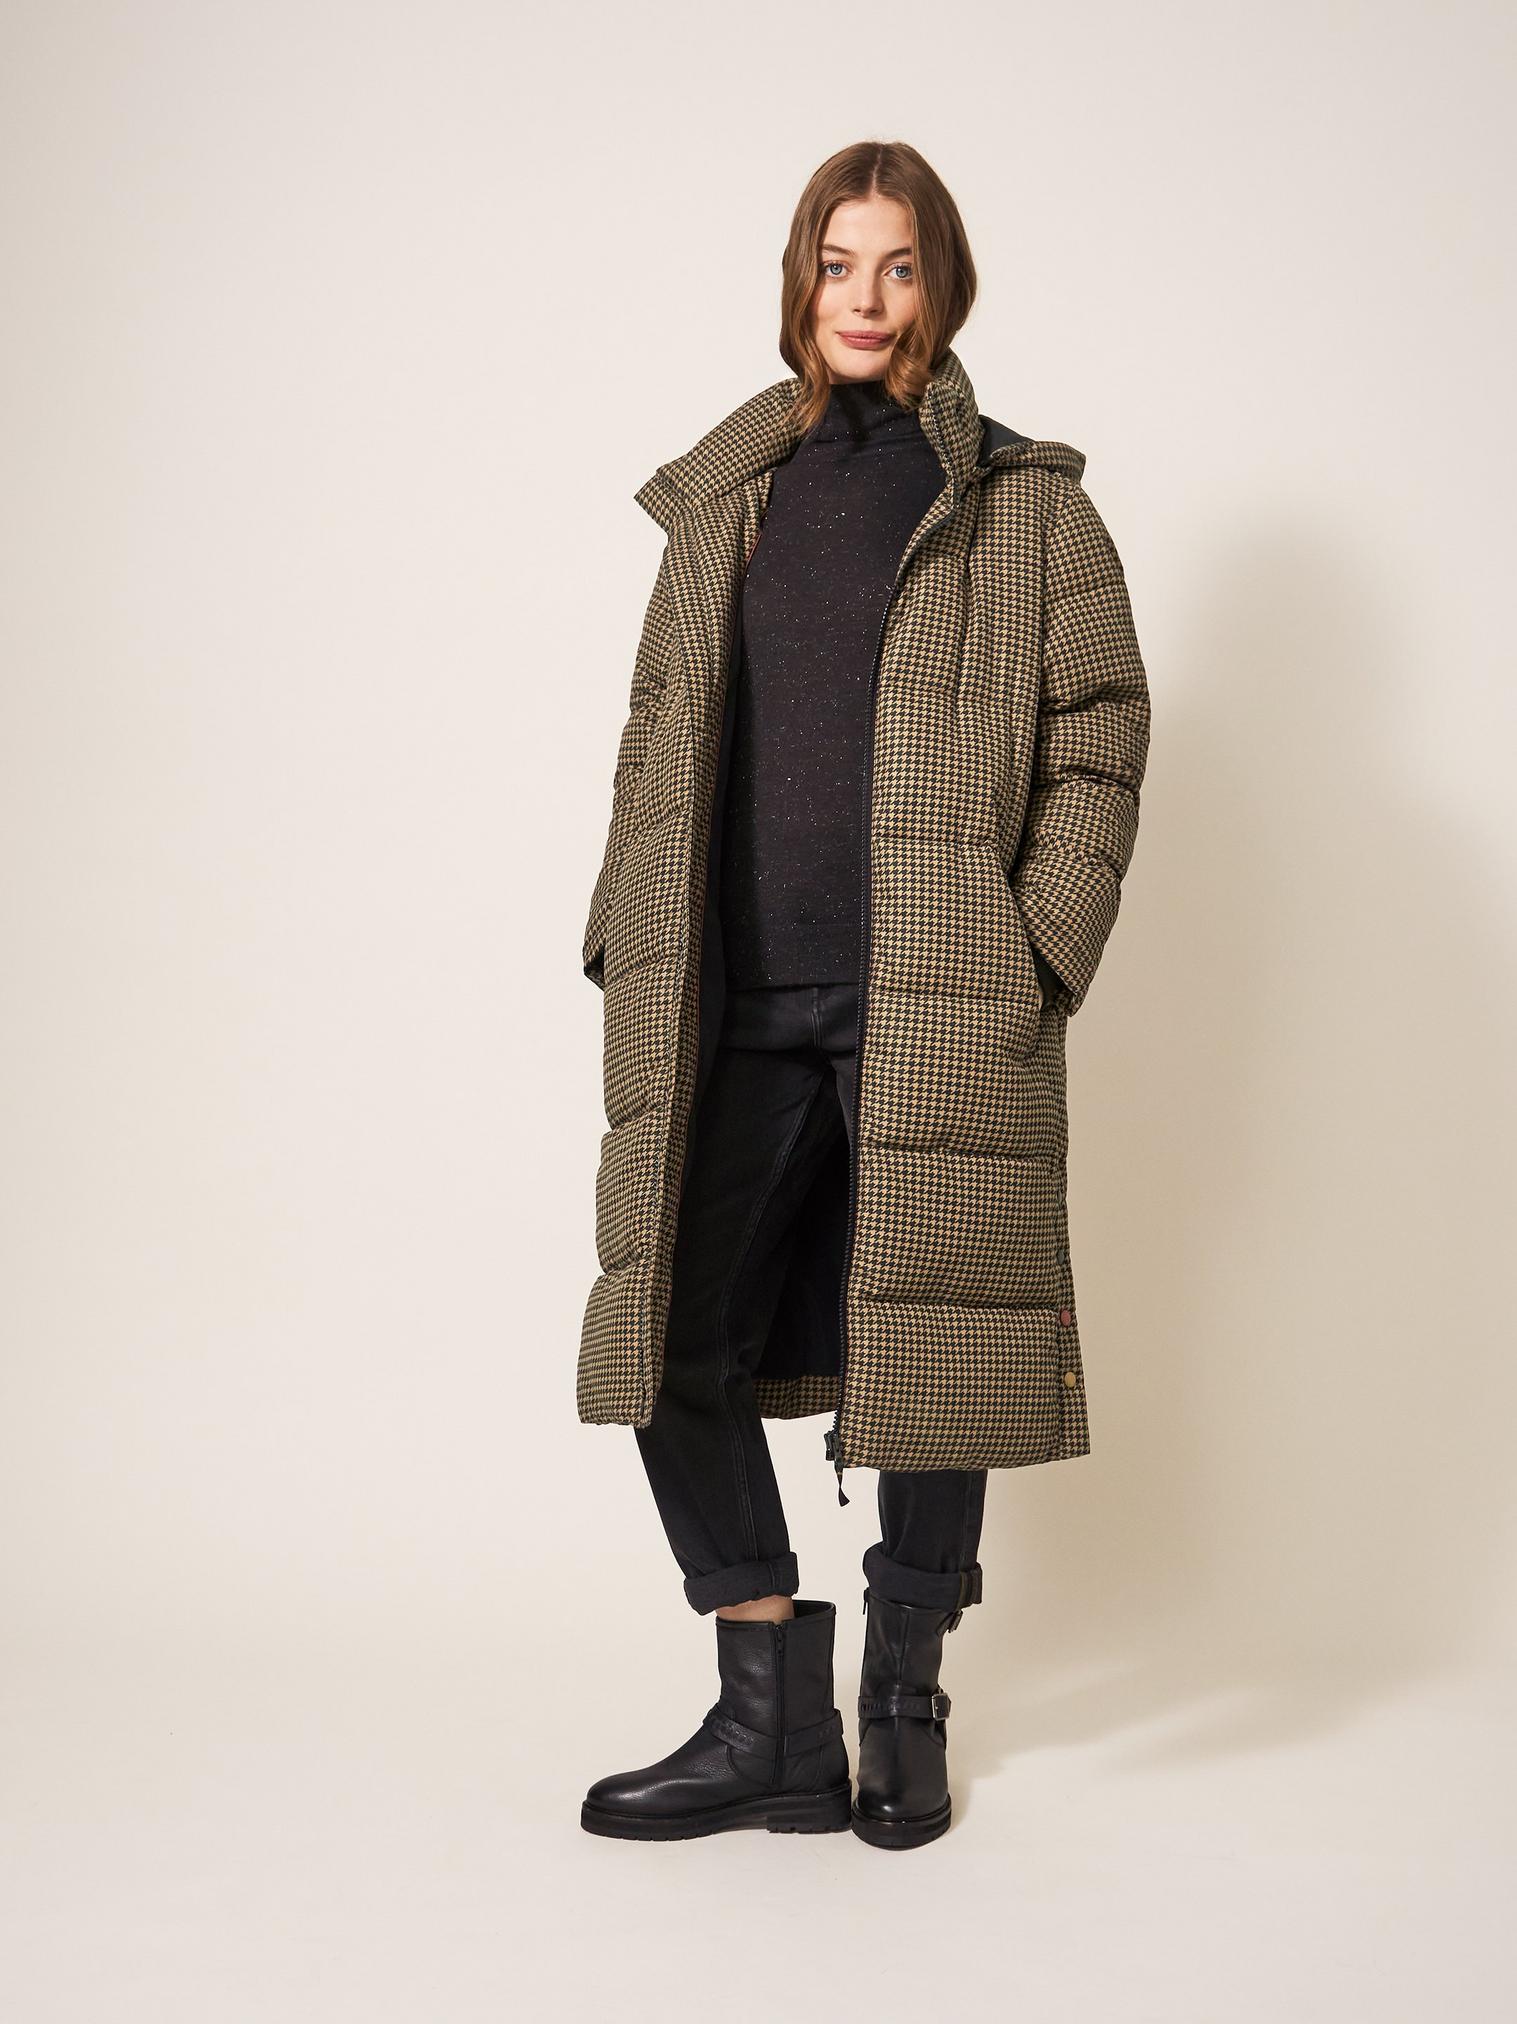 Elyse Quilted Coat in TAN PR - LIFESTYLE